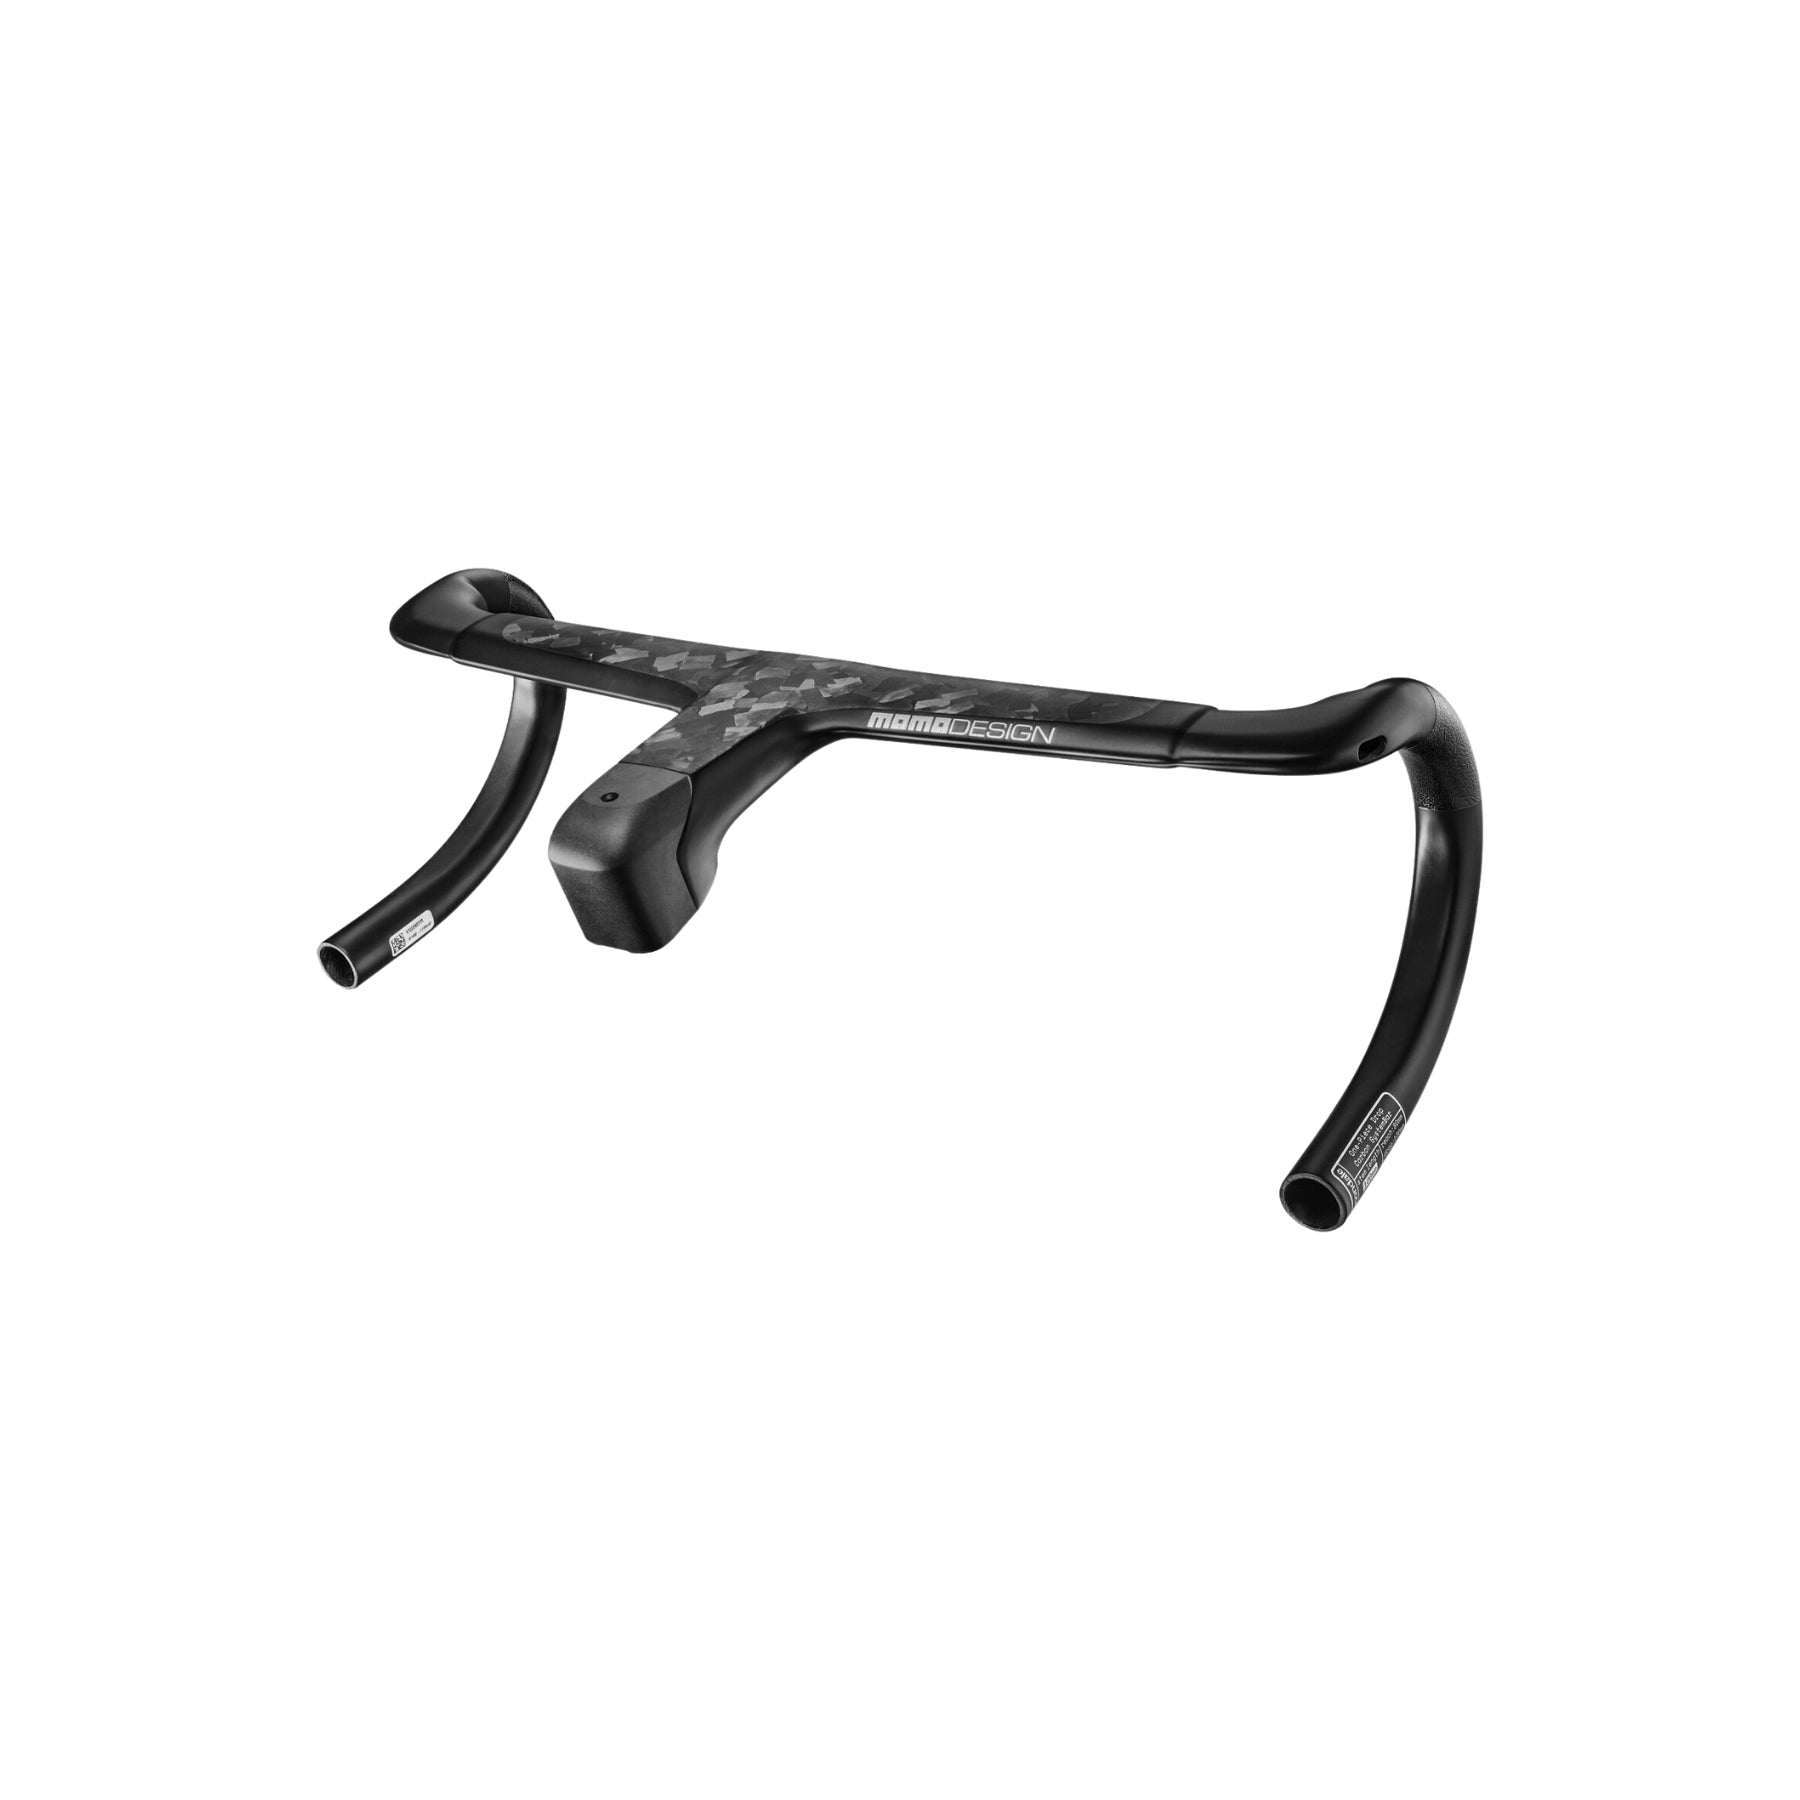 Handlebar Cannondale Systembar R-One Carbon 